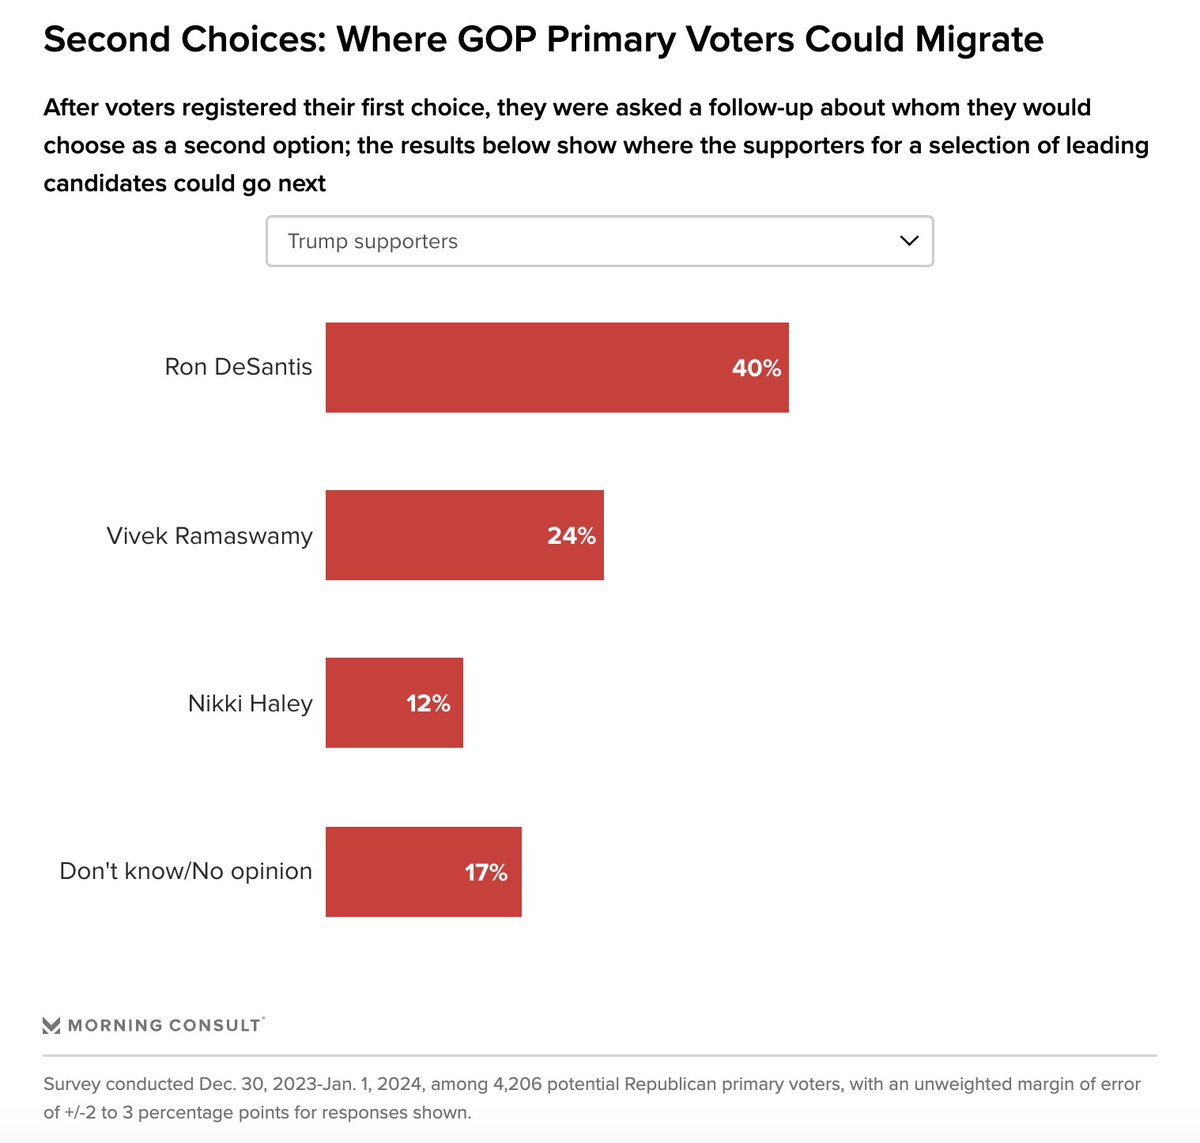 According to our latest data, DeSantis is the second choice of 40% of potential GOP primary voters who are supporting Trump, followed by 24% who would back Ramaswamy and 12% who would back Haley. morningconsult.biz/3OYzNlB